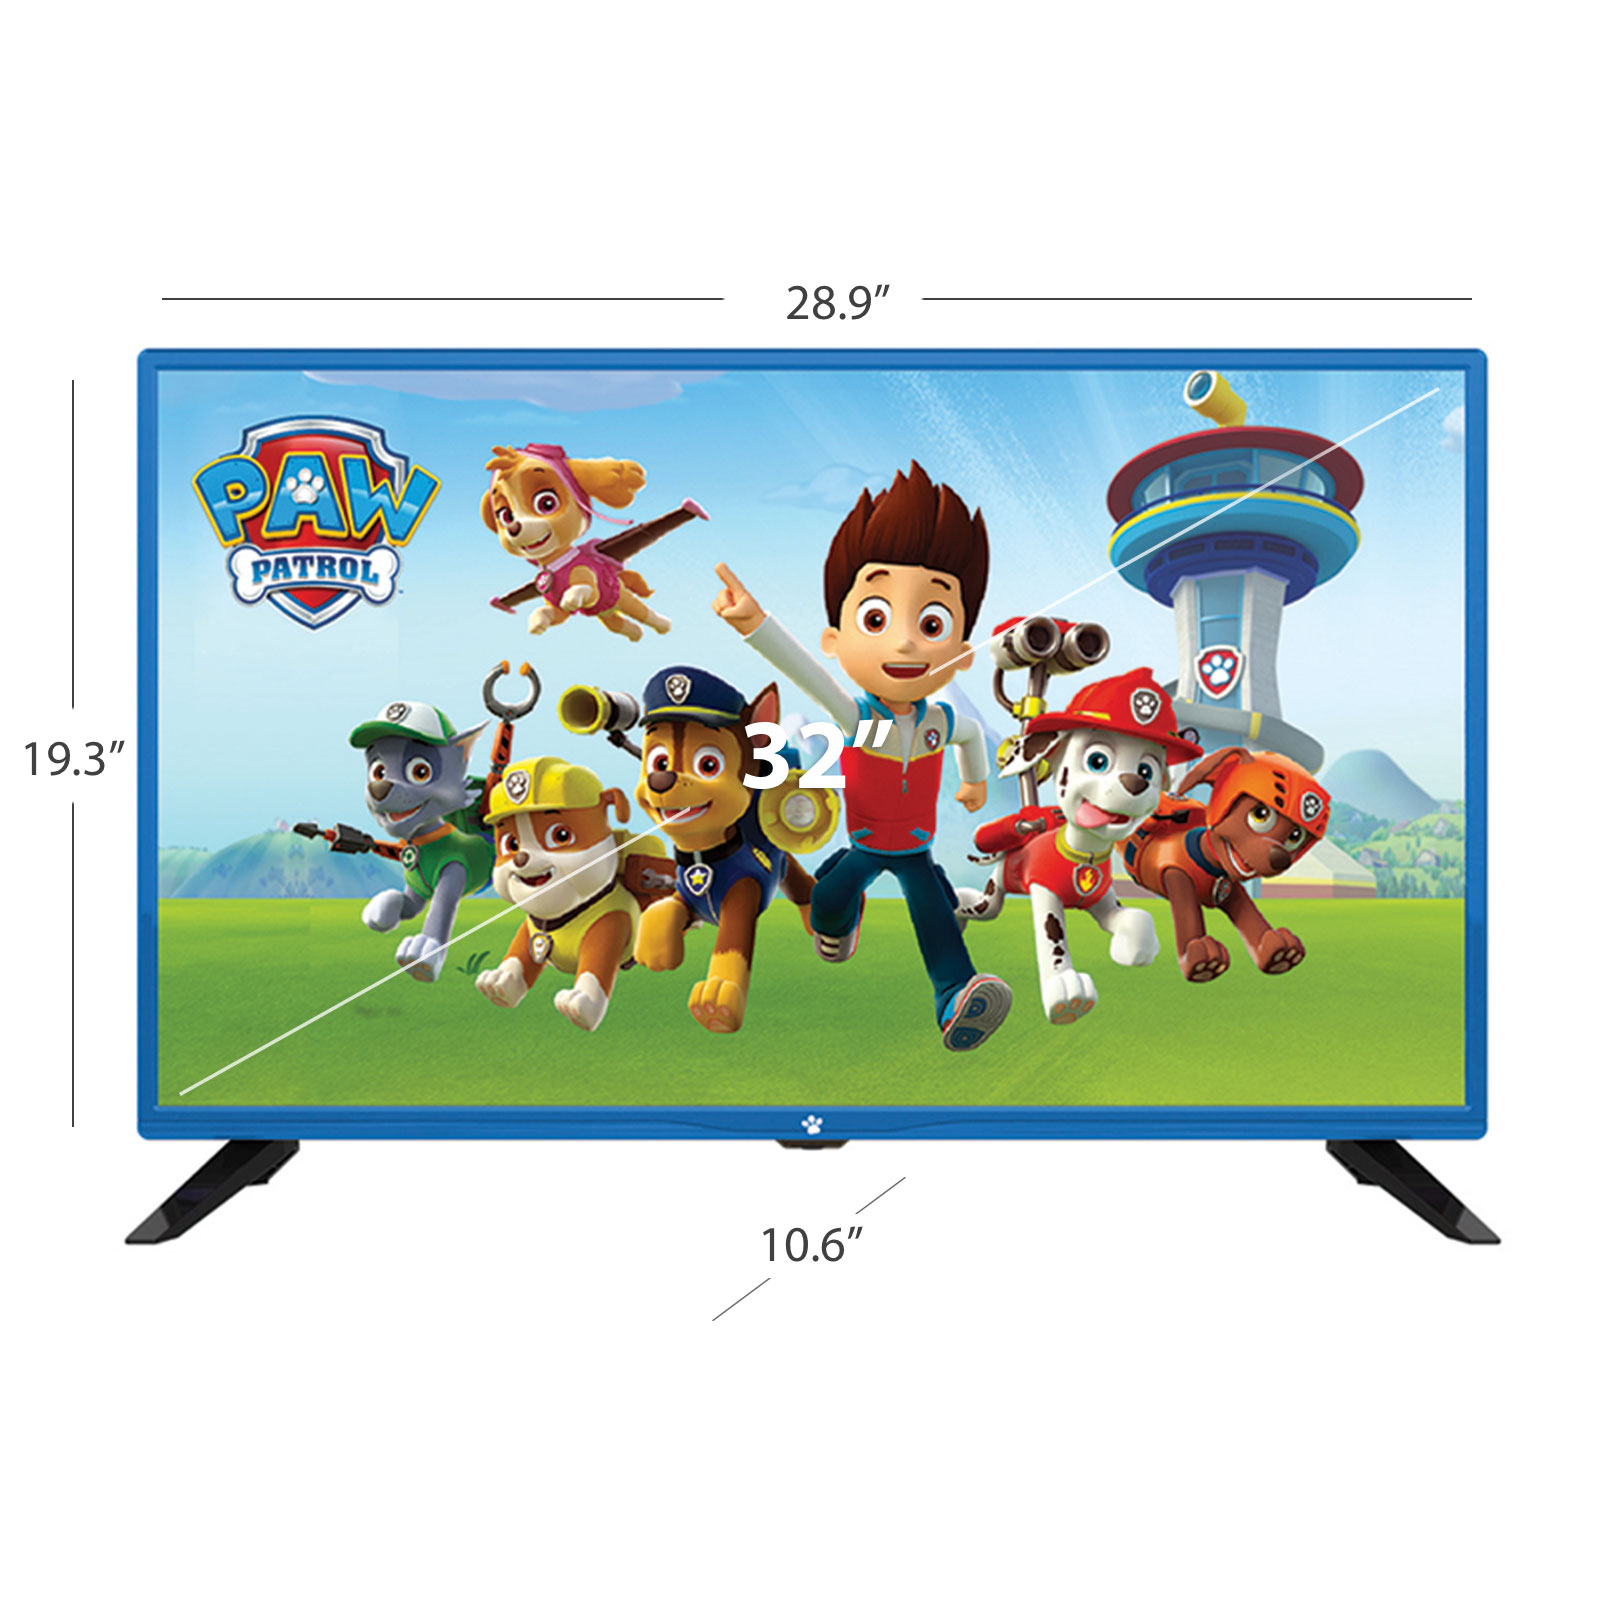 32" Paw Patrol HD (720p) LED TV with Built-In TV Tuner (PTV3200) - image 2 of 6